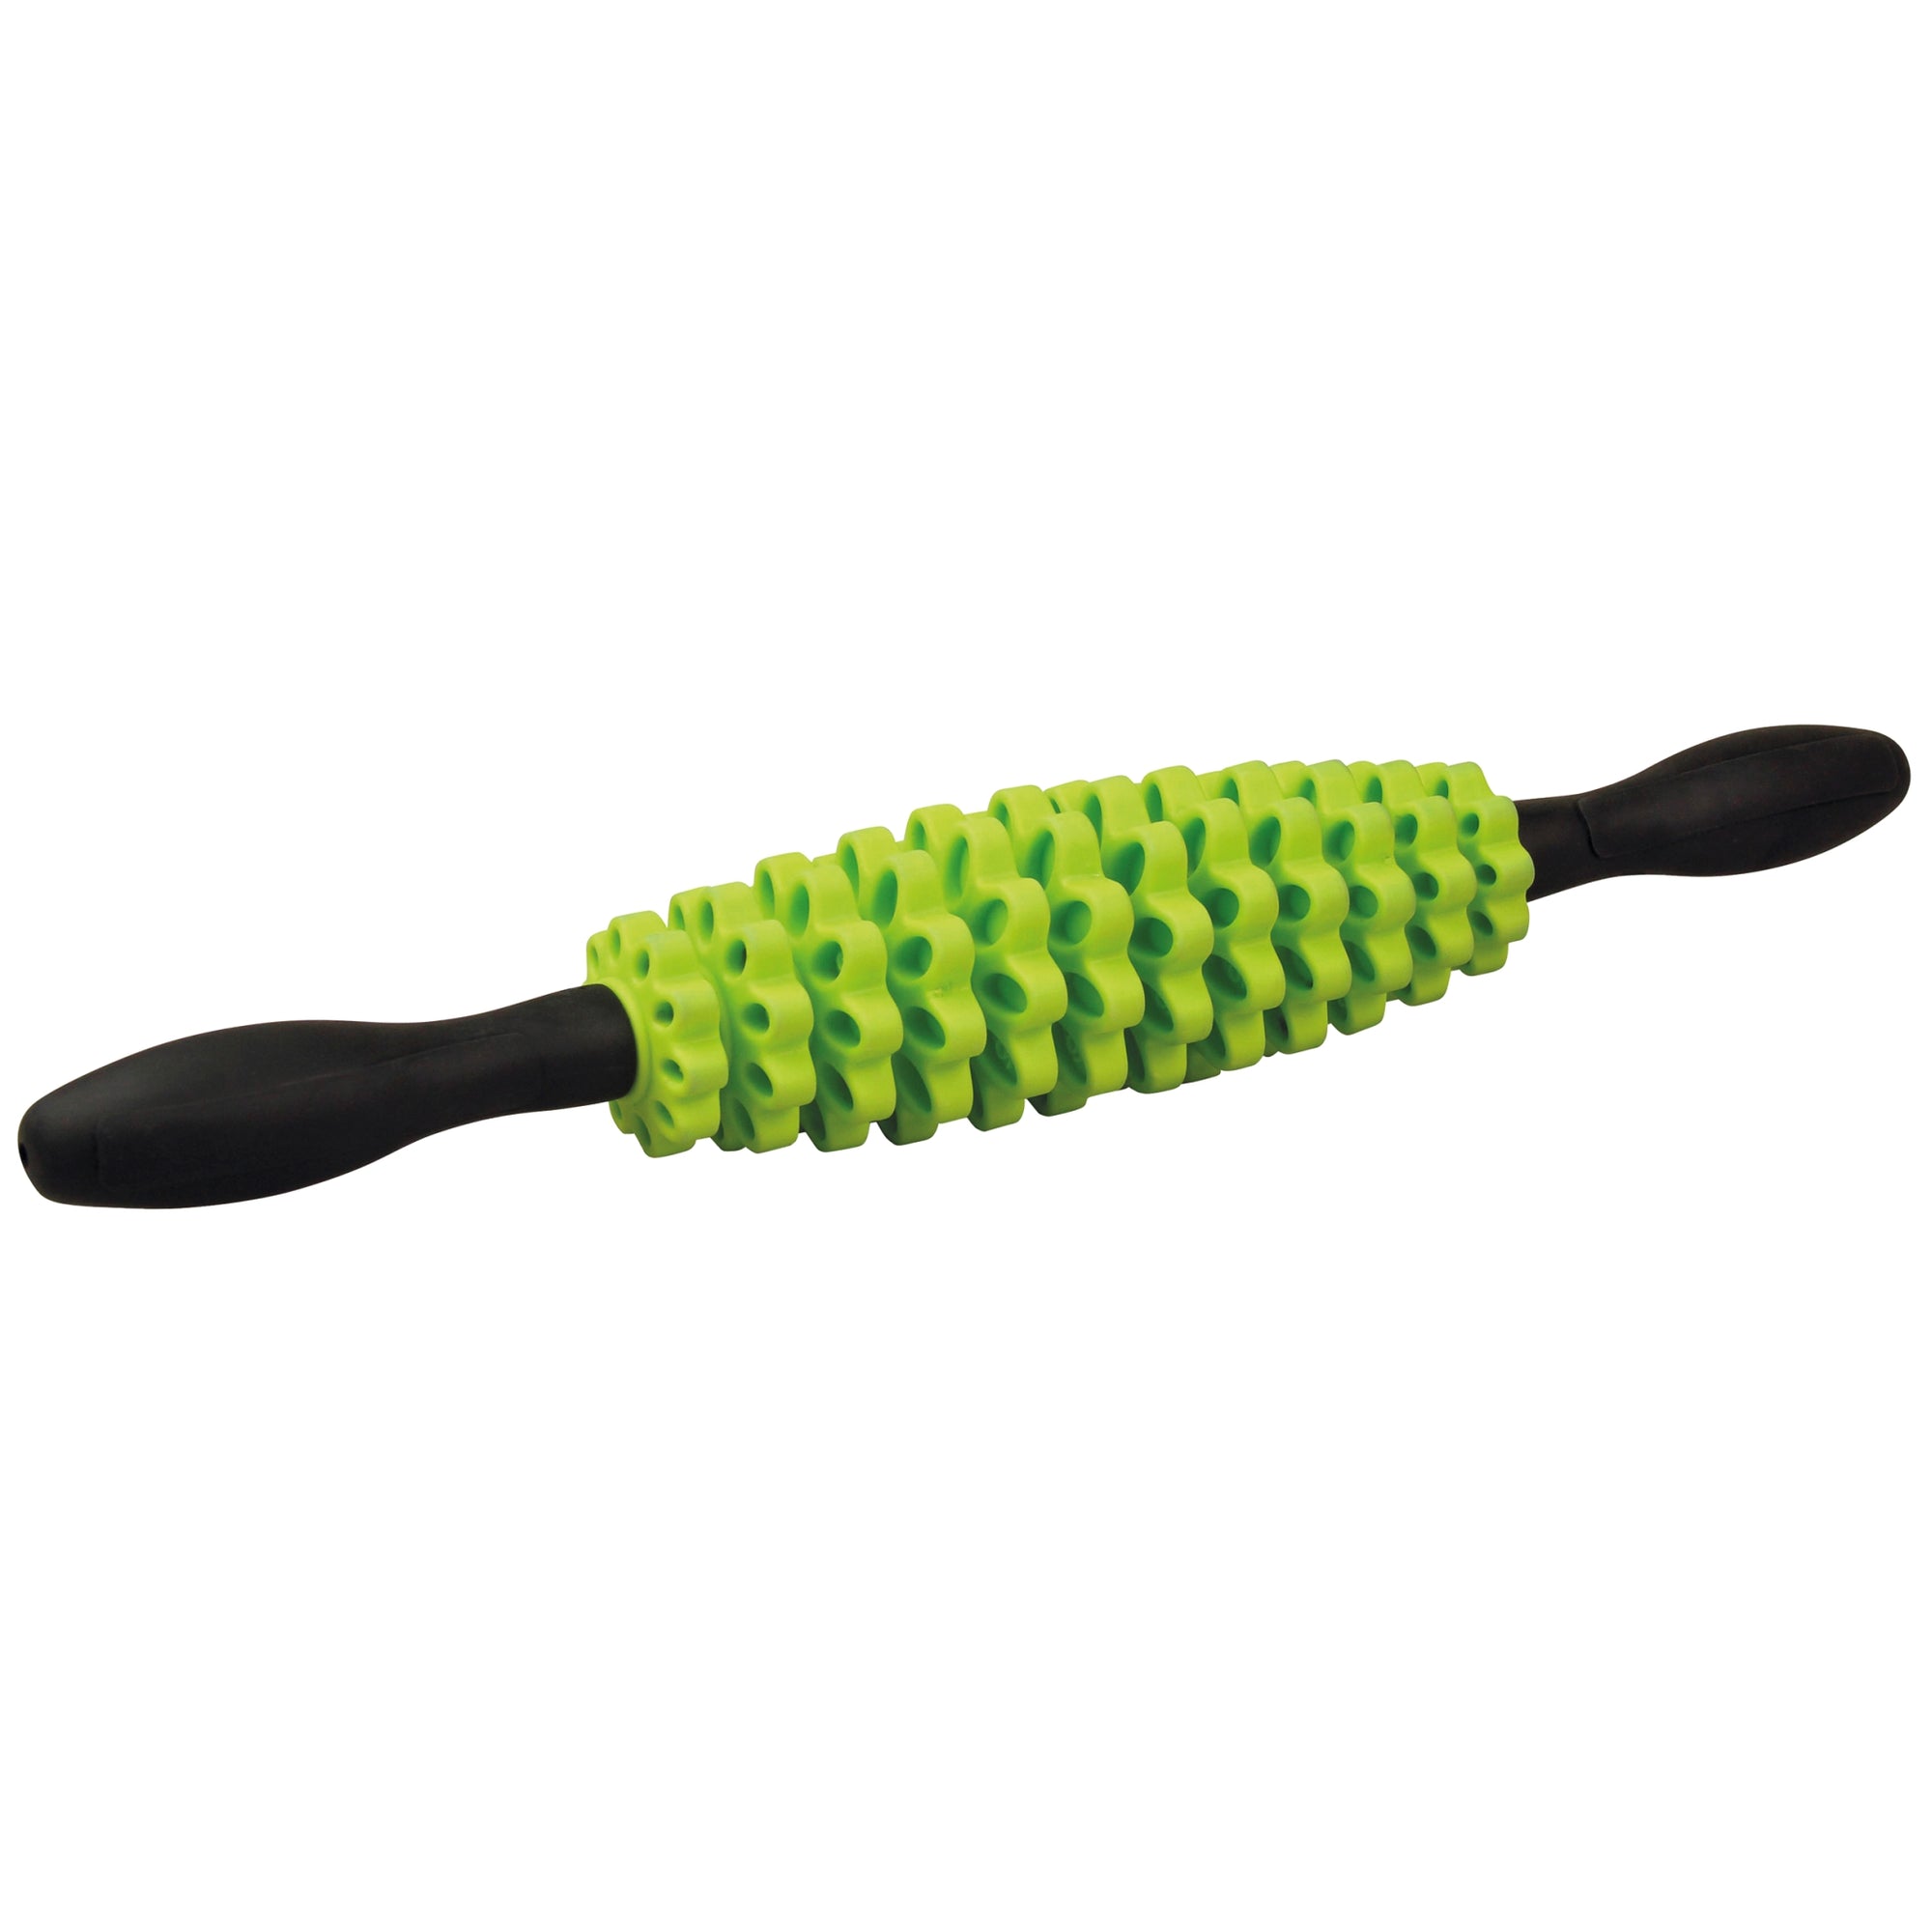 UFE adjustable massage stick with black handles, and 12 green wheels 